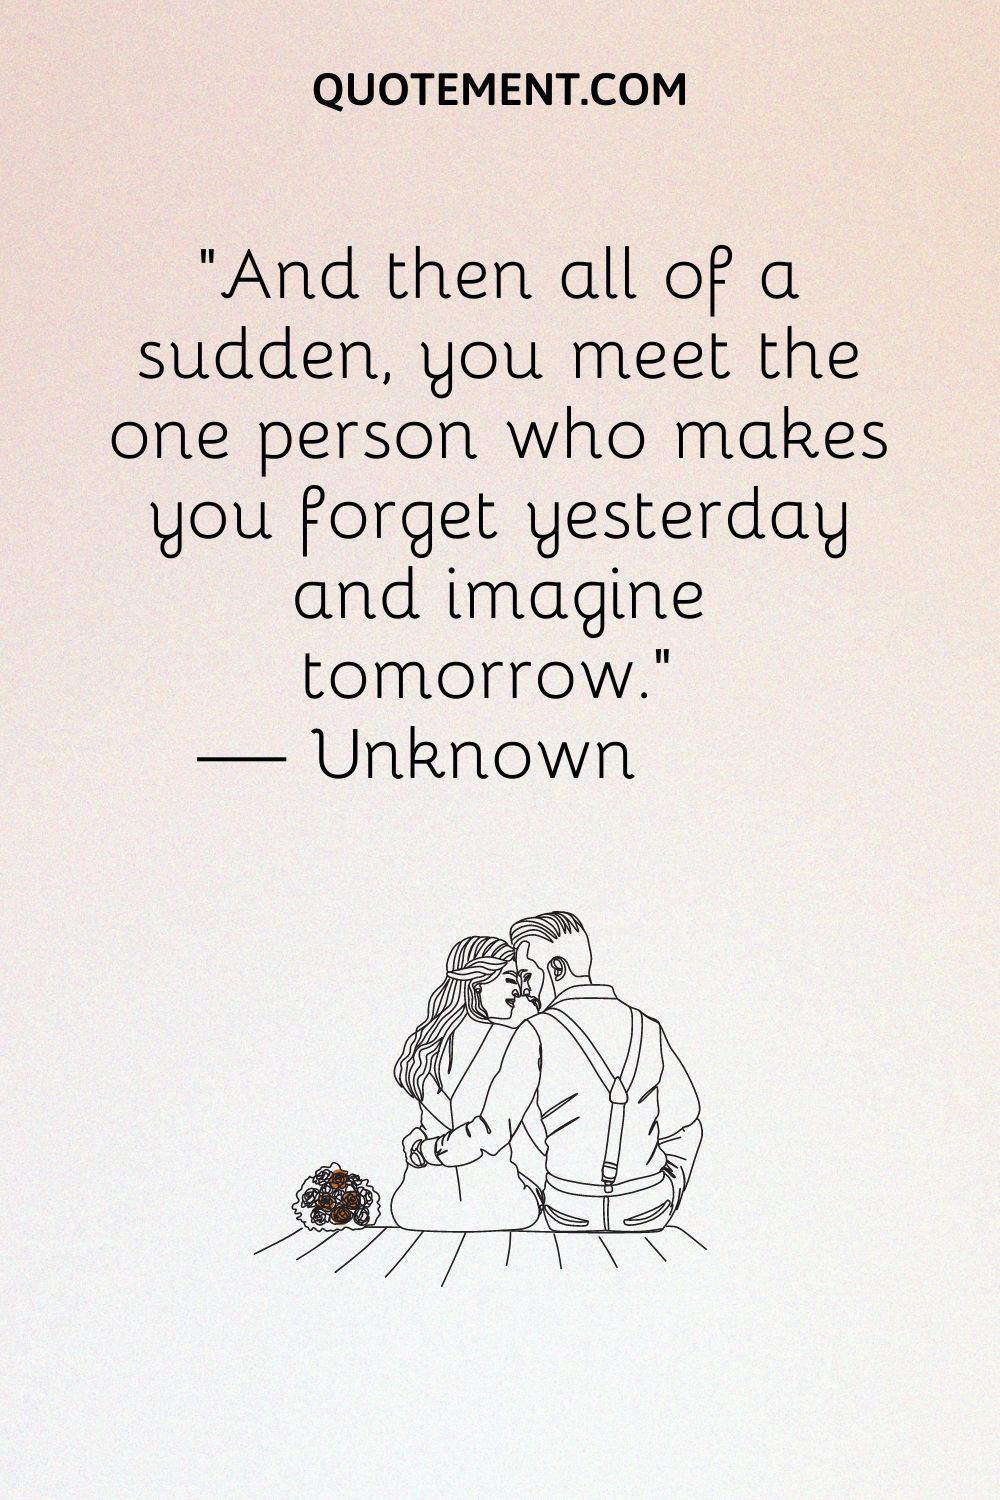 And then all of a sudden, you meet the one person who makes you forget yesterday and imagine tomorrow.